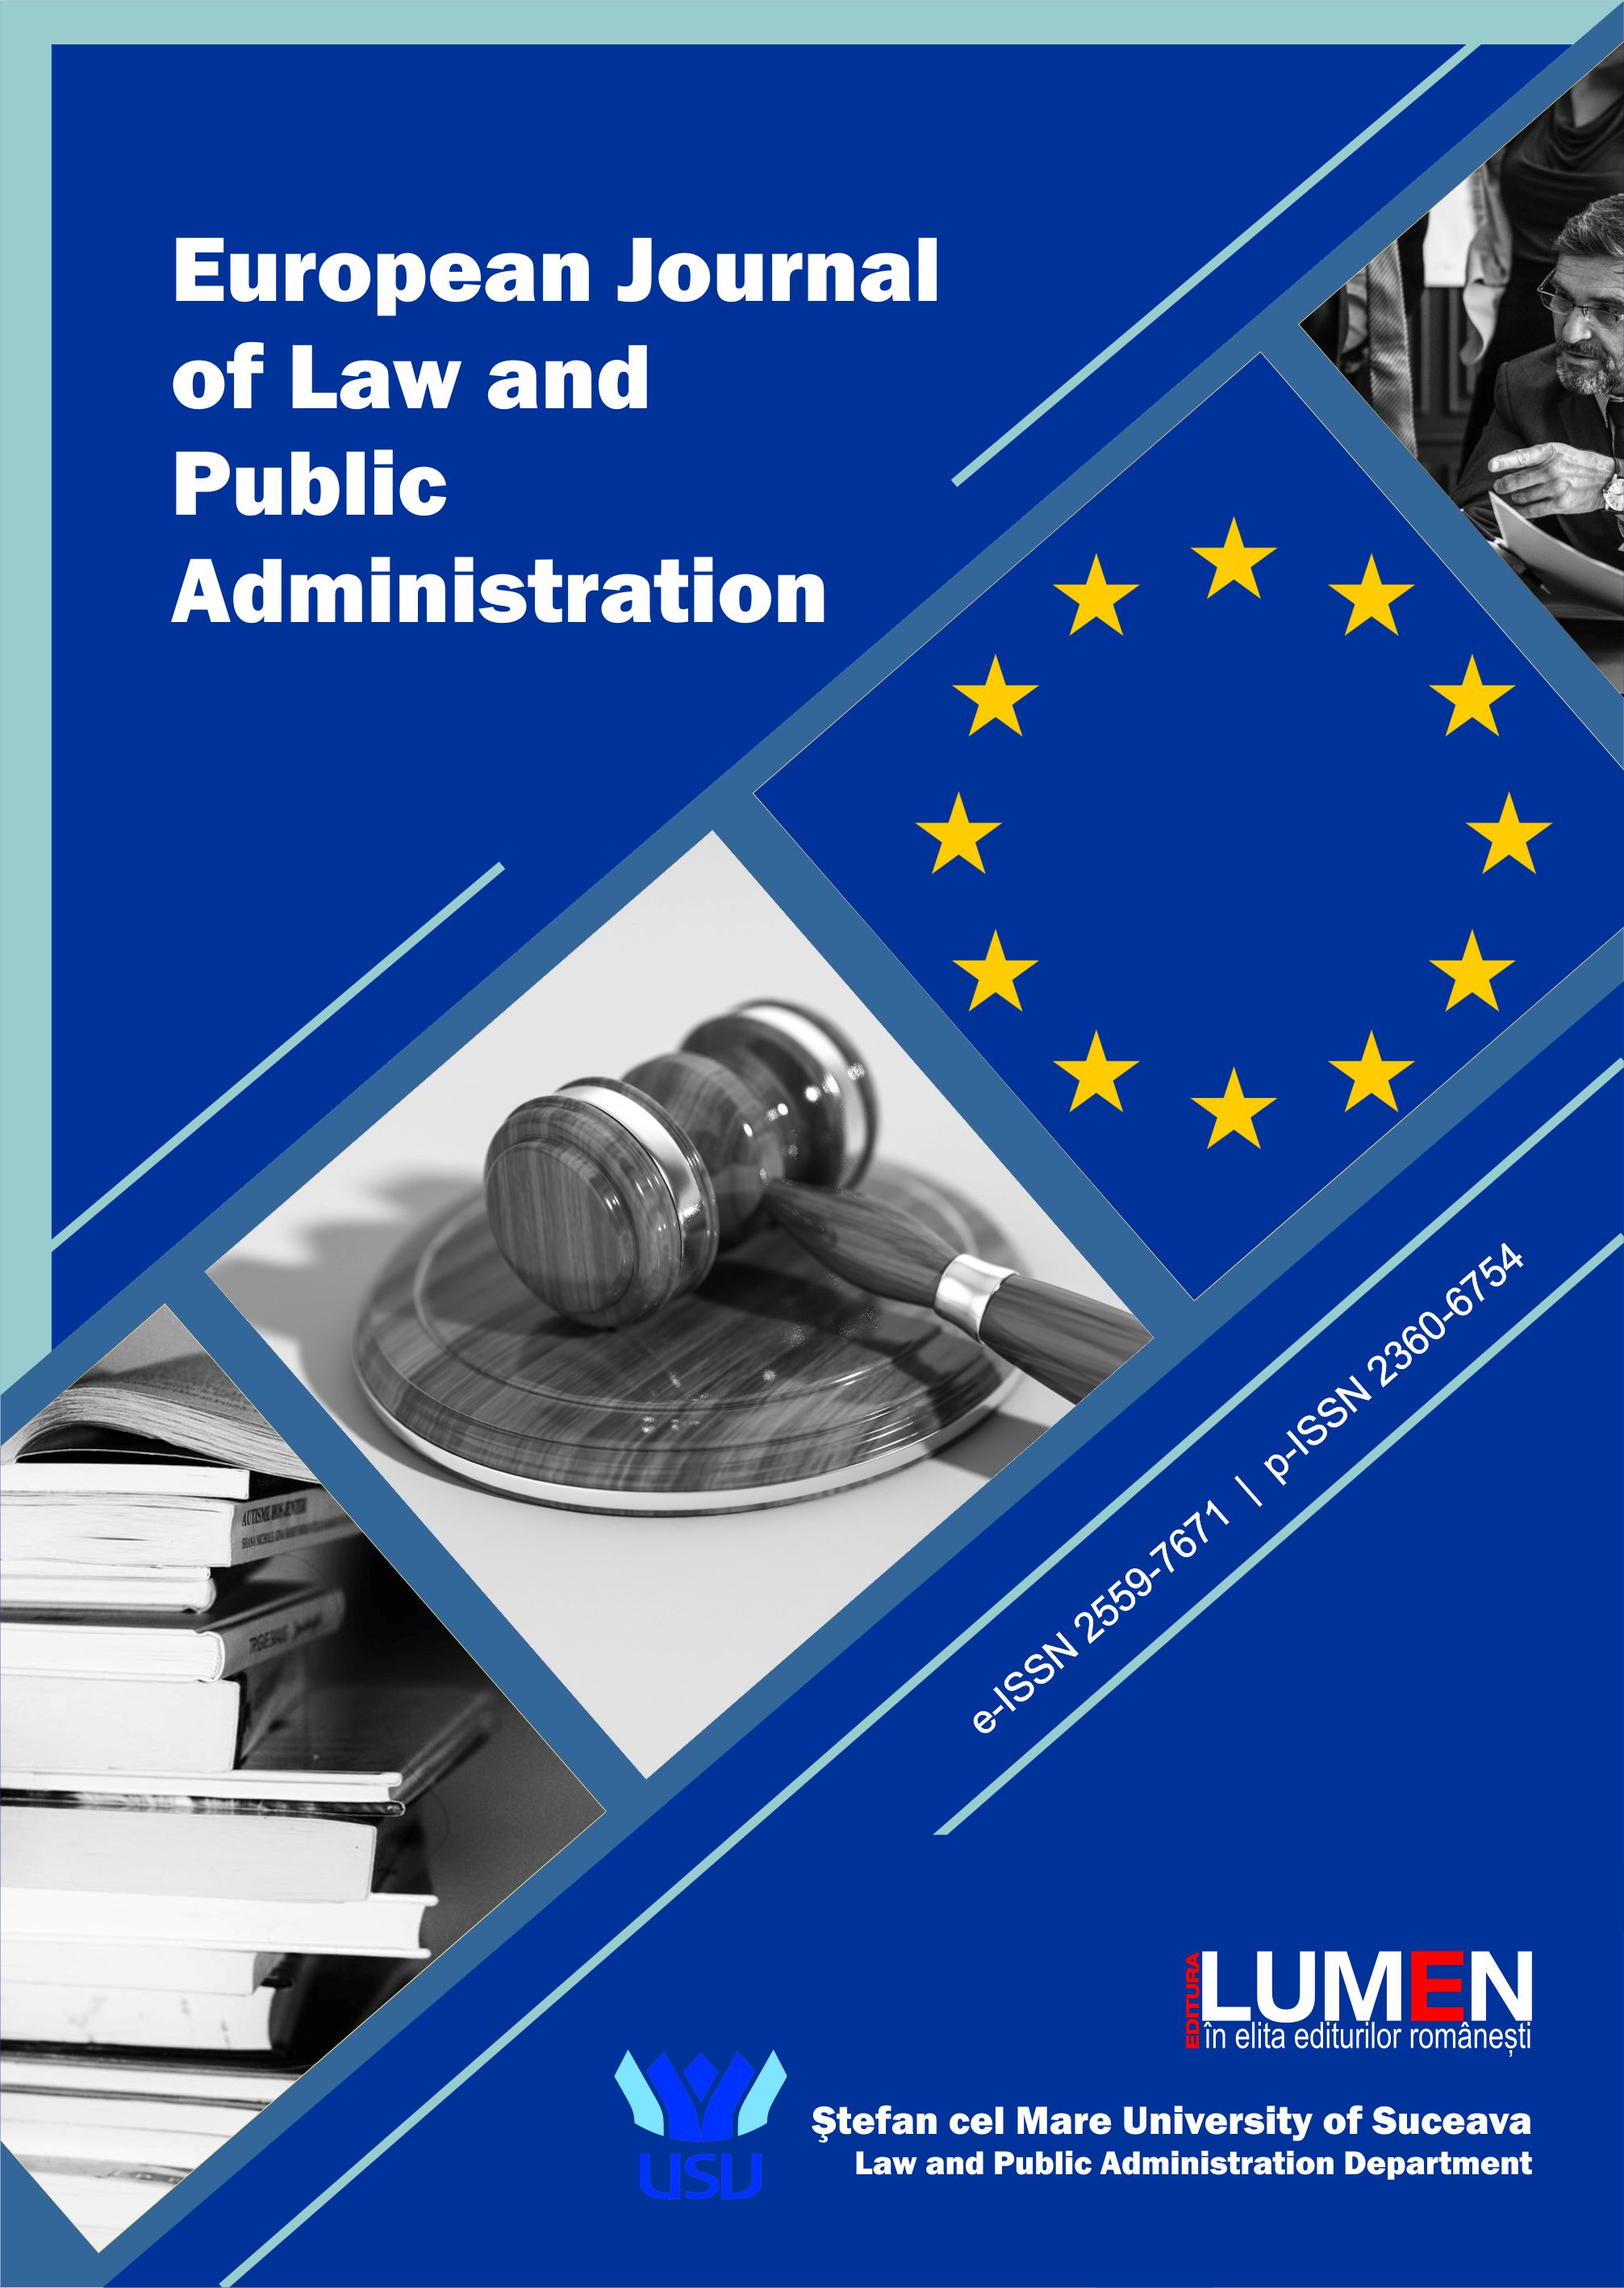 European Journal of Law and Public Administration